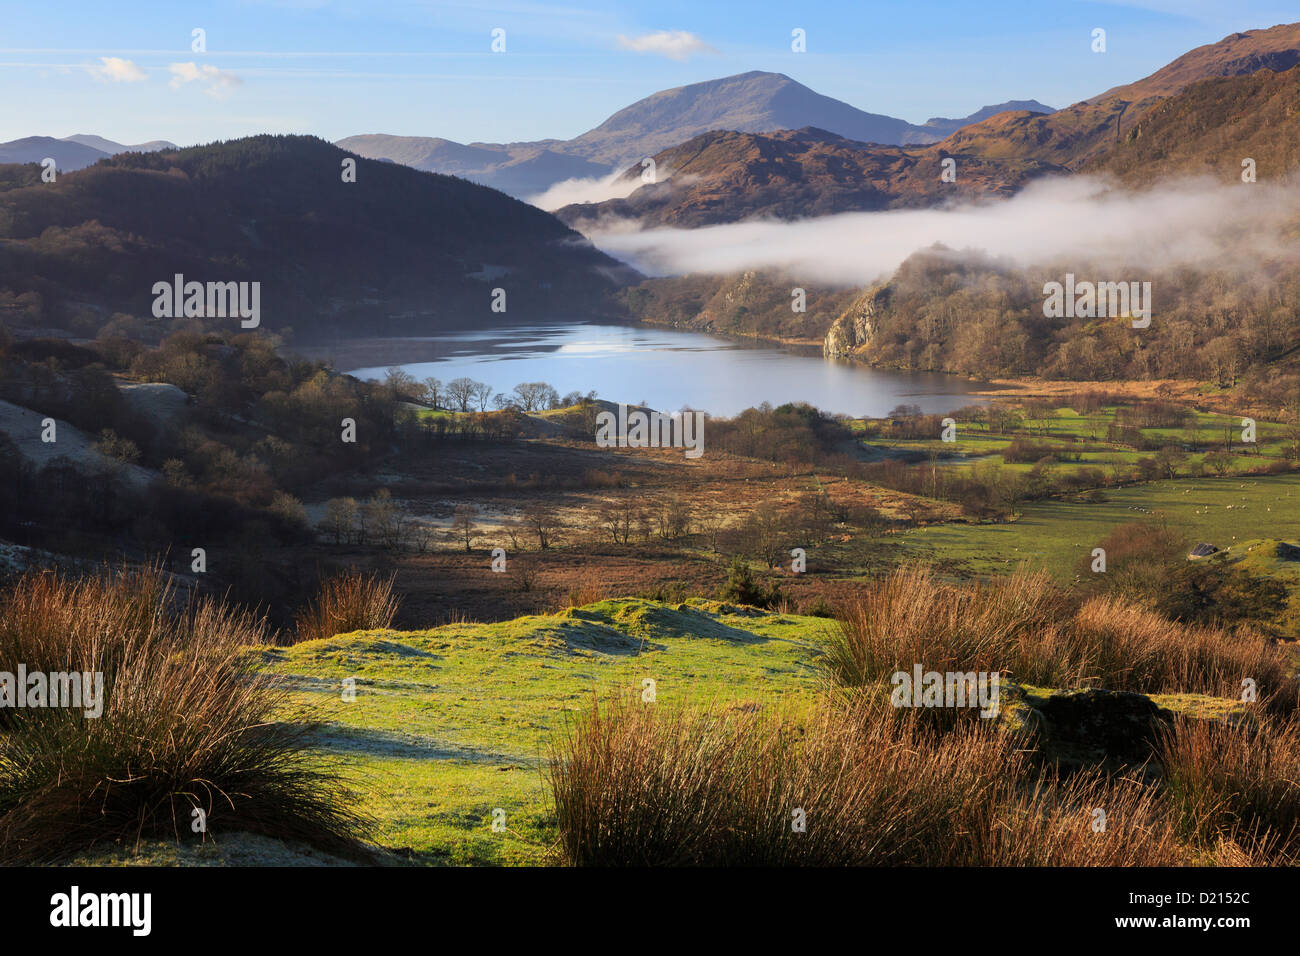 Snowdonia landscape scenic view along Nantgwynant to Llyn Gwynant lake with morning mist in mountains of Snowdonia National Park Wales UK Britain Stock Photo